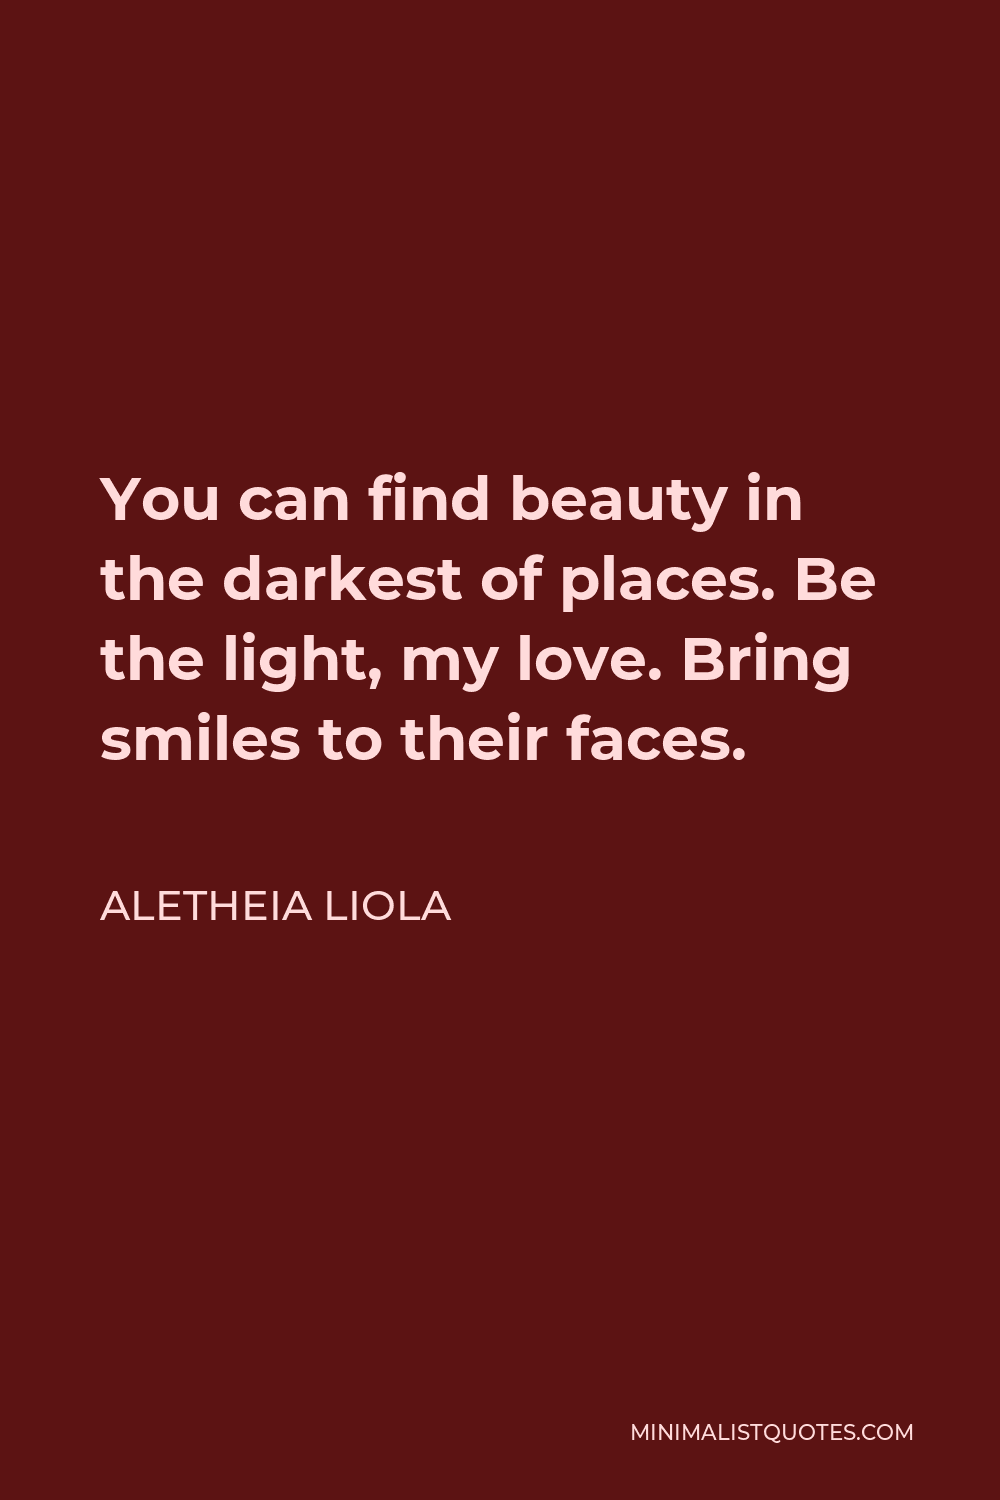 Aletheia Liola Quote - You can find beauty in the darkest of places. Be the light, my love. Bring smiles to their faces.